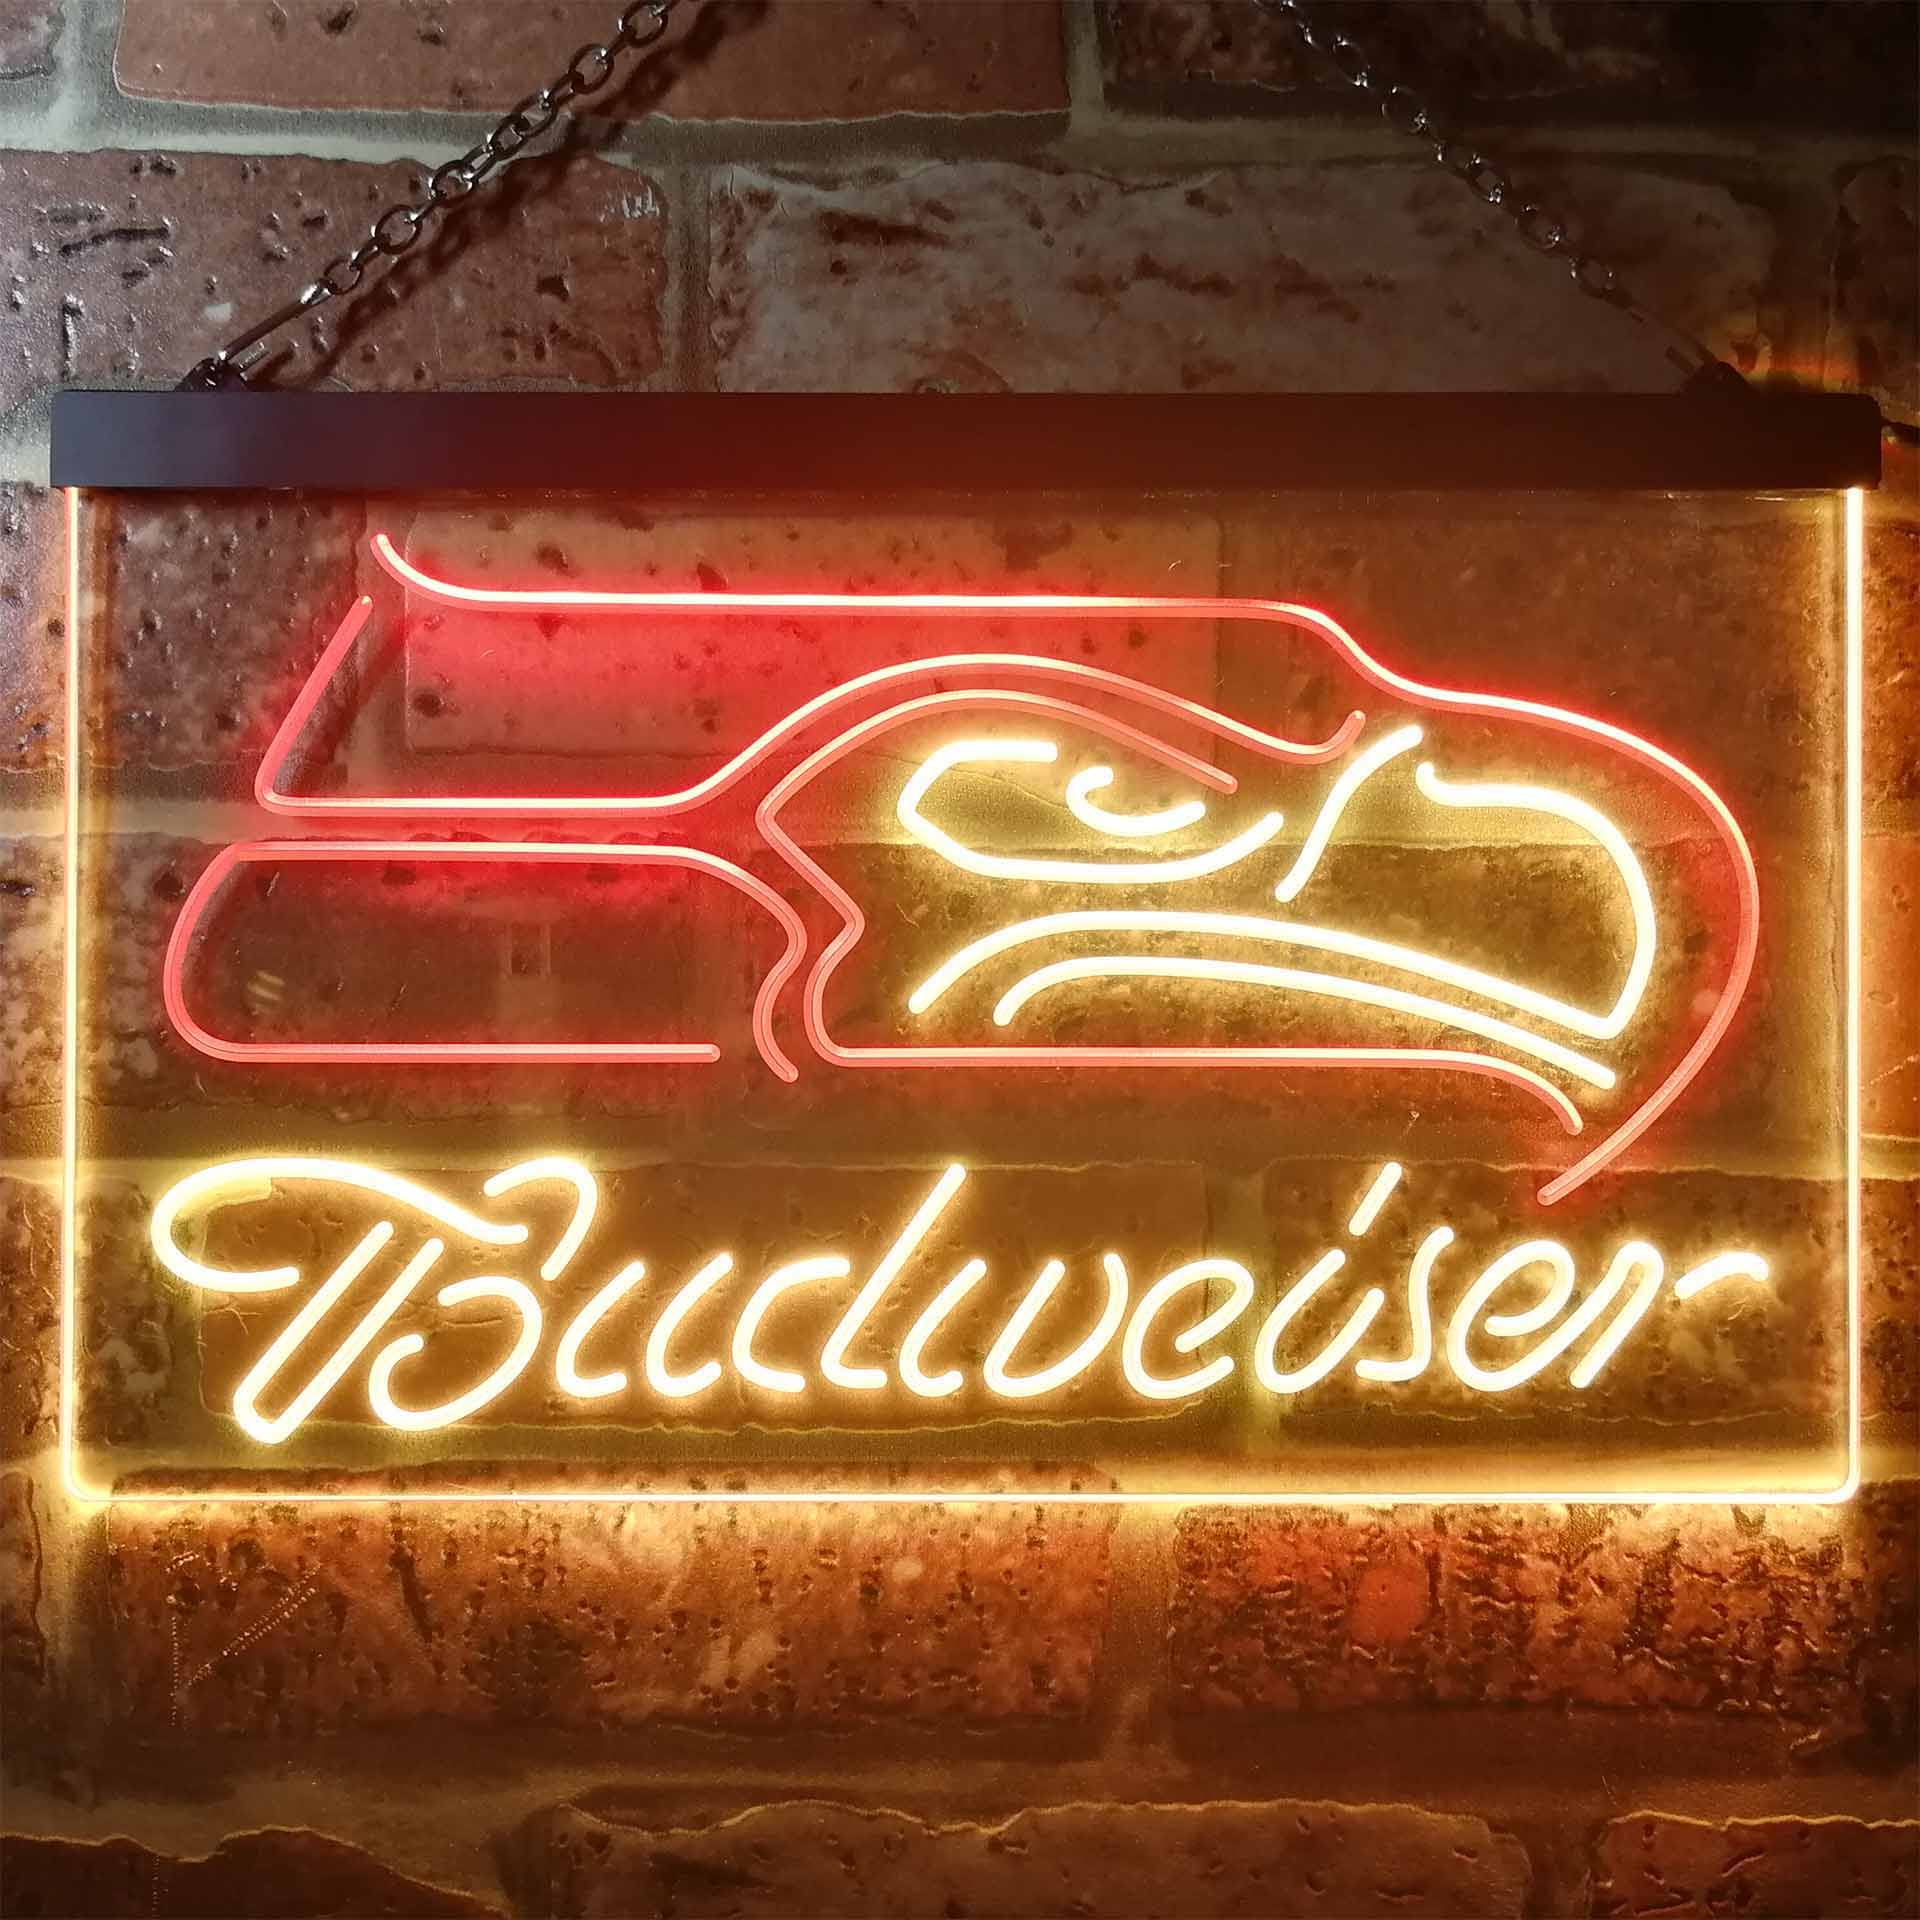 Seattle Seahawks Budweiser LED Neon Sign